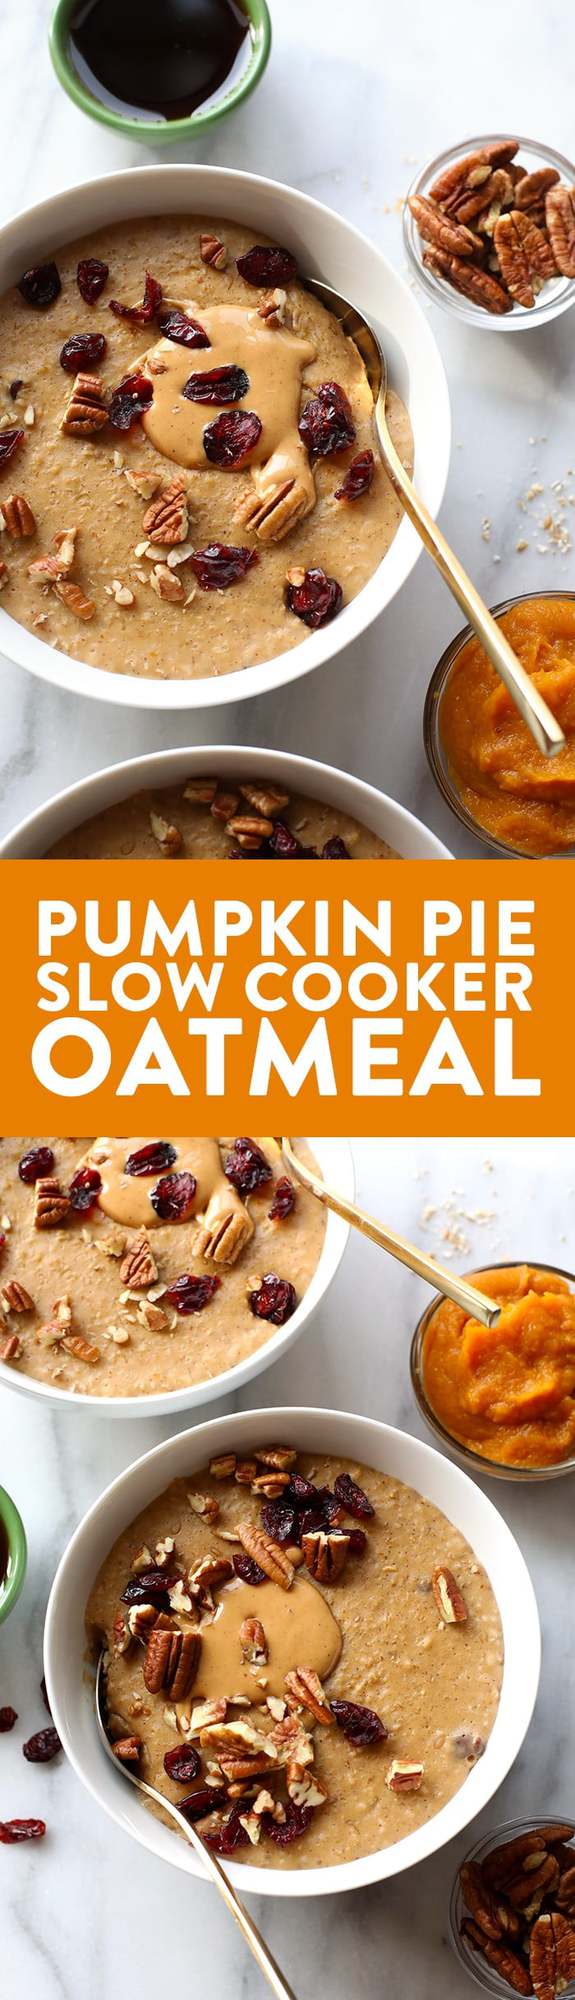 This Pumpkin Pie Slow Cooker Oatmeal is creamy as can be and full of flavor. It's made with steel cut oats, pumpkin puree, pumpkin spice, and a hint of maple. 